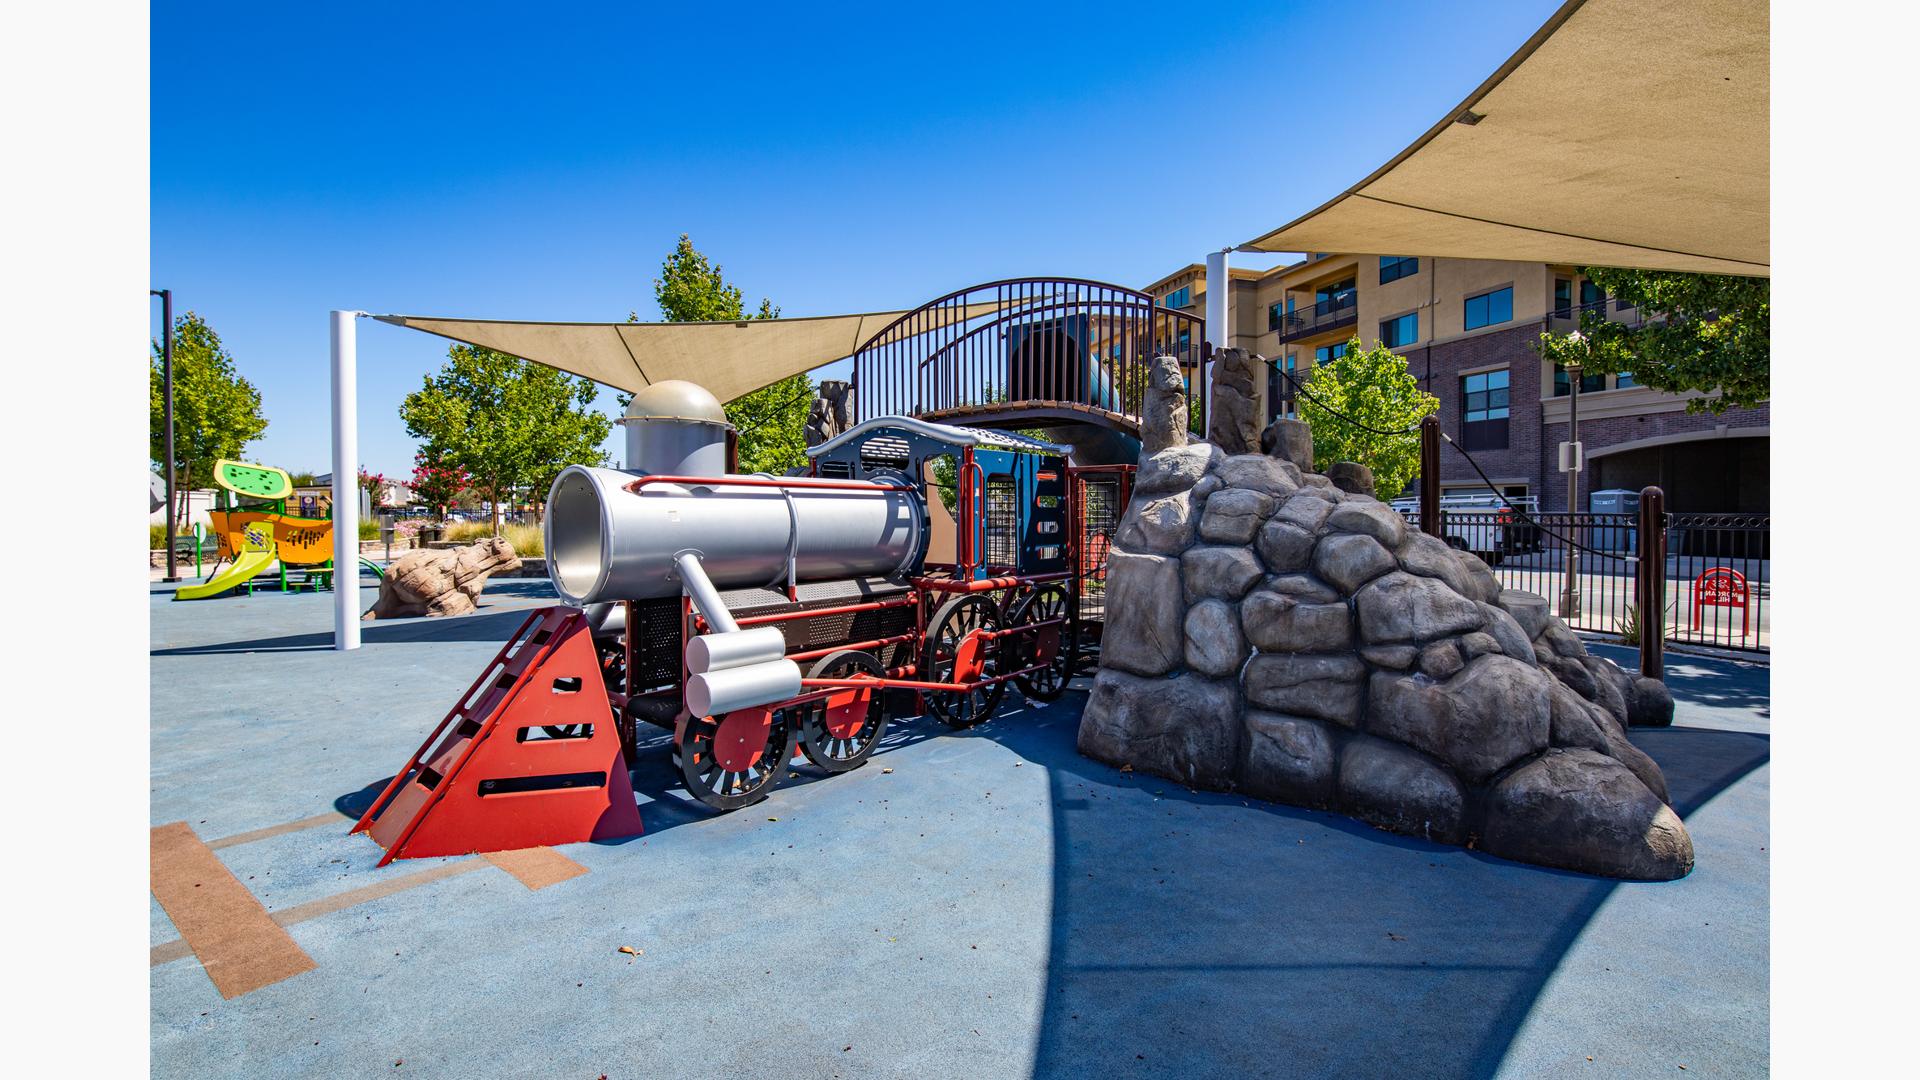 Custom trained-themed playground going through rocky tunnel.